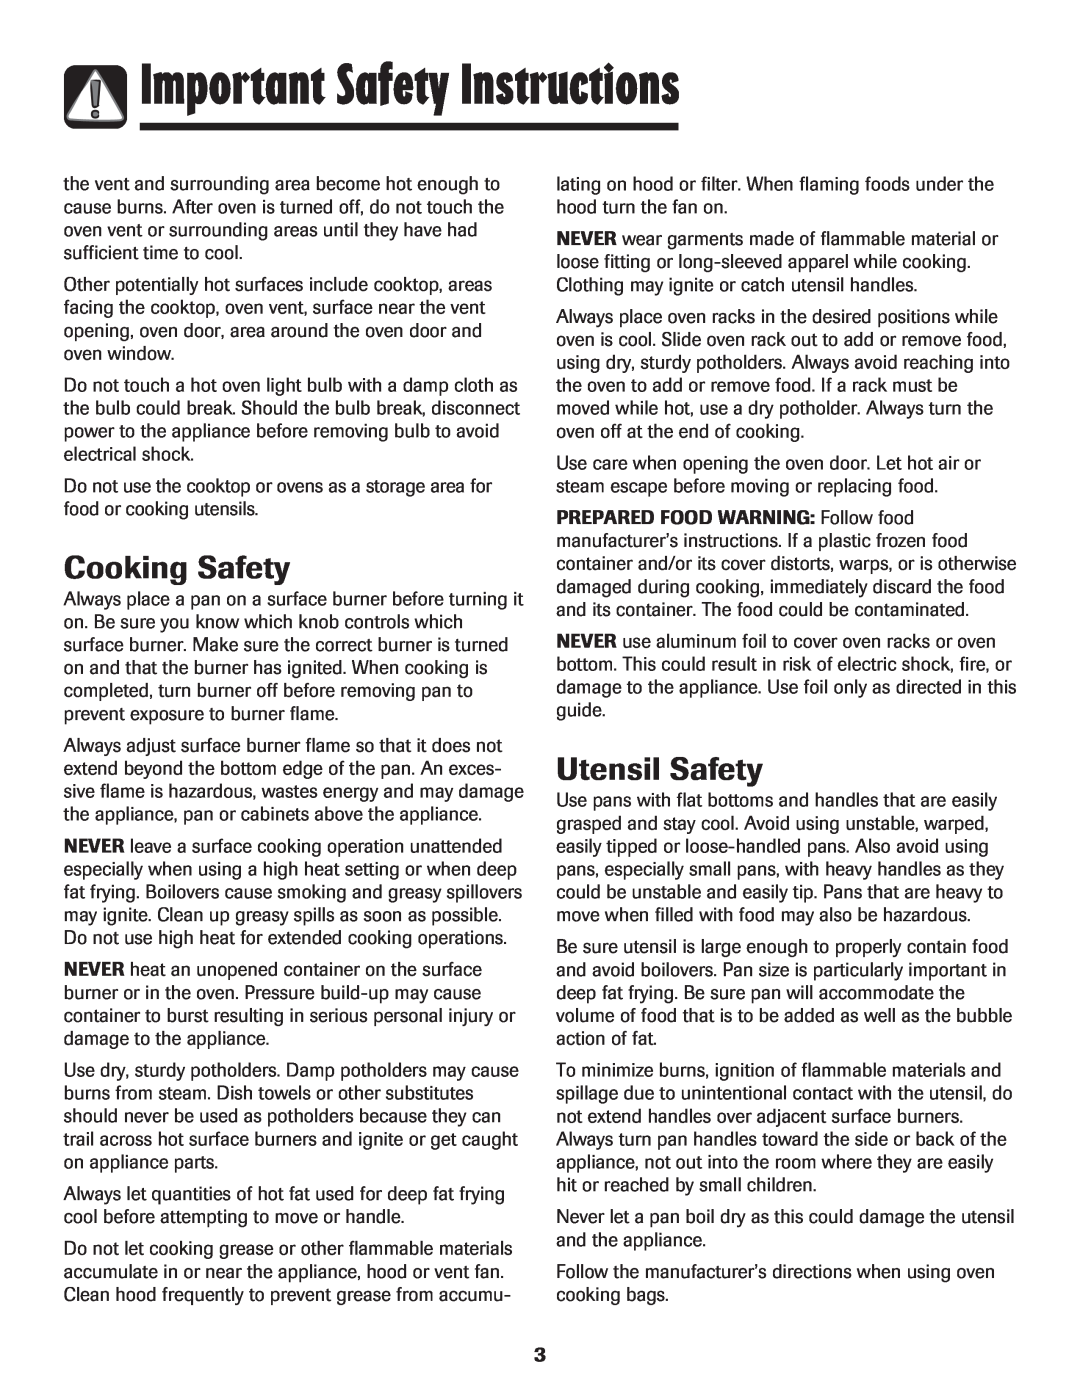 Magic Chef 500 important safety instructions Cooking Safety, Utensil Safety, Important Safety Instructions 